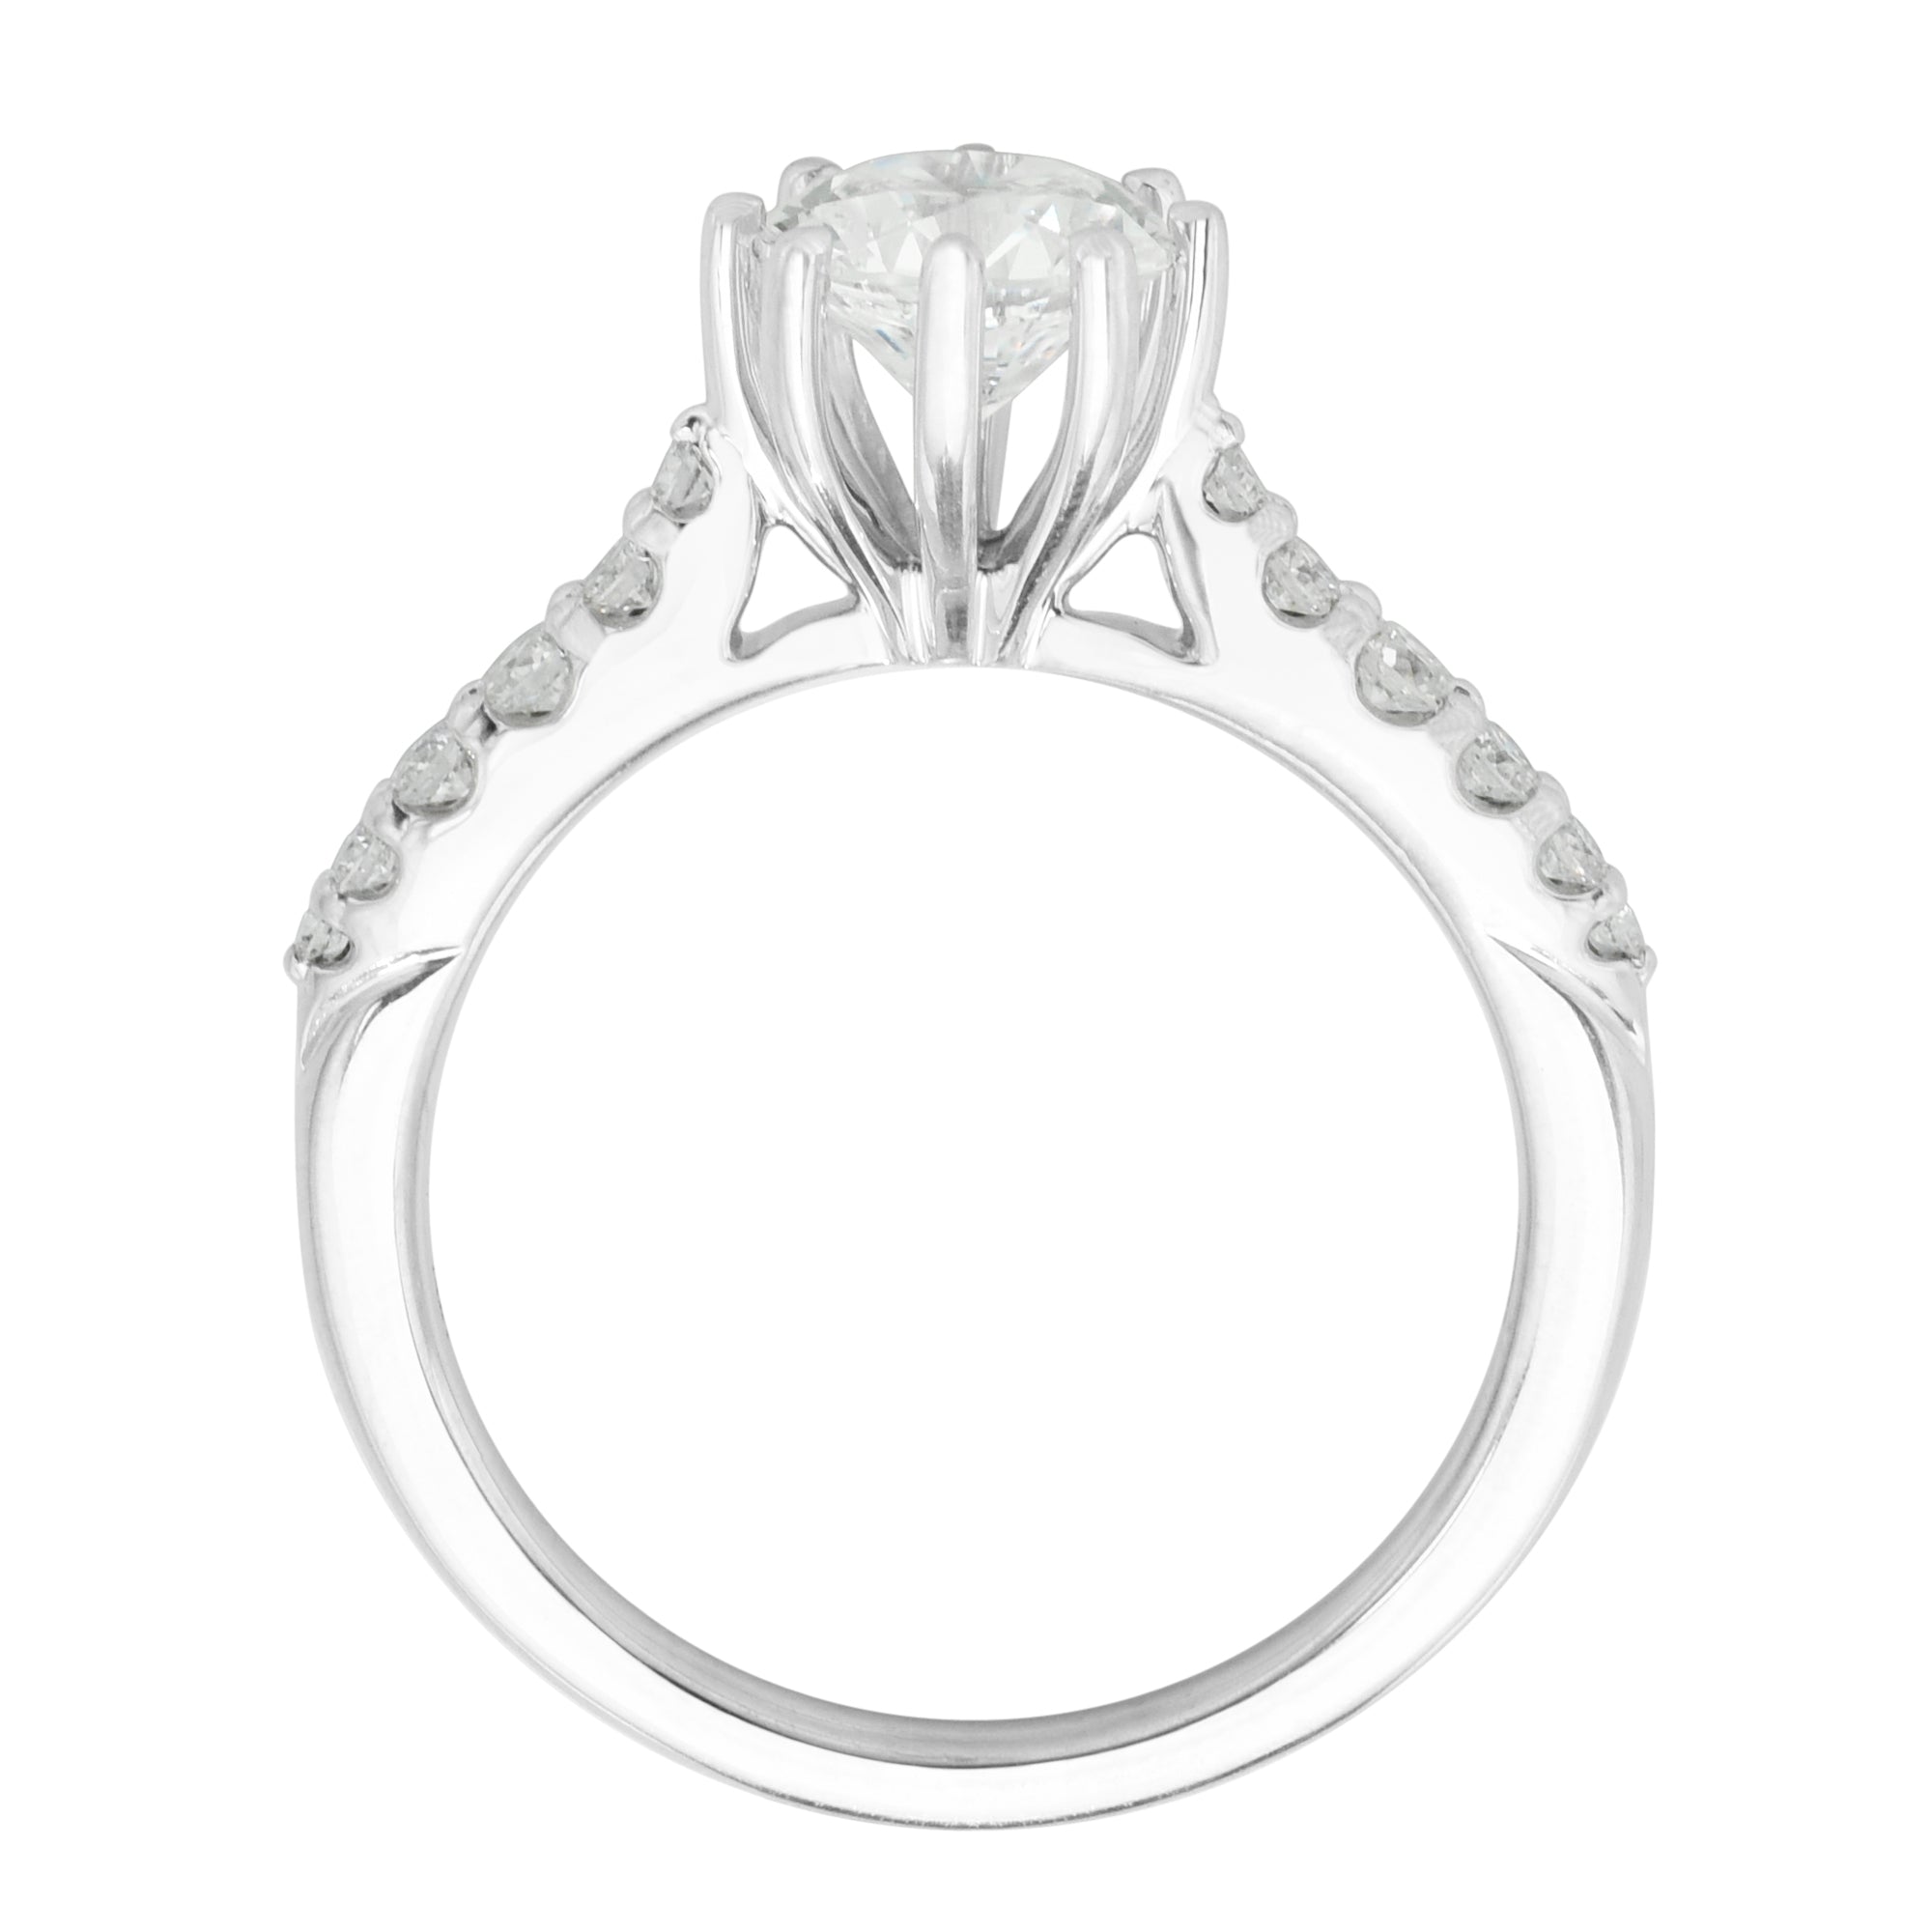 Ritani Tapered Diamond Engagement Ring Setting in 14kt White Gold (1/5ct tw)